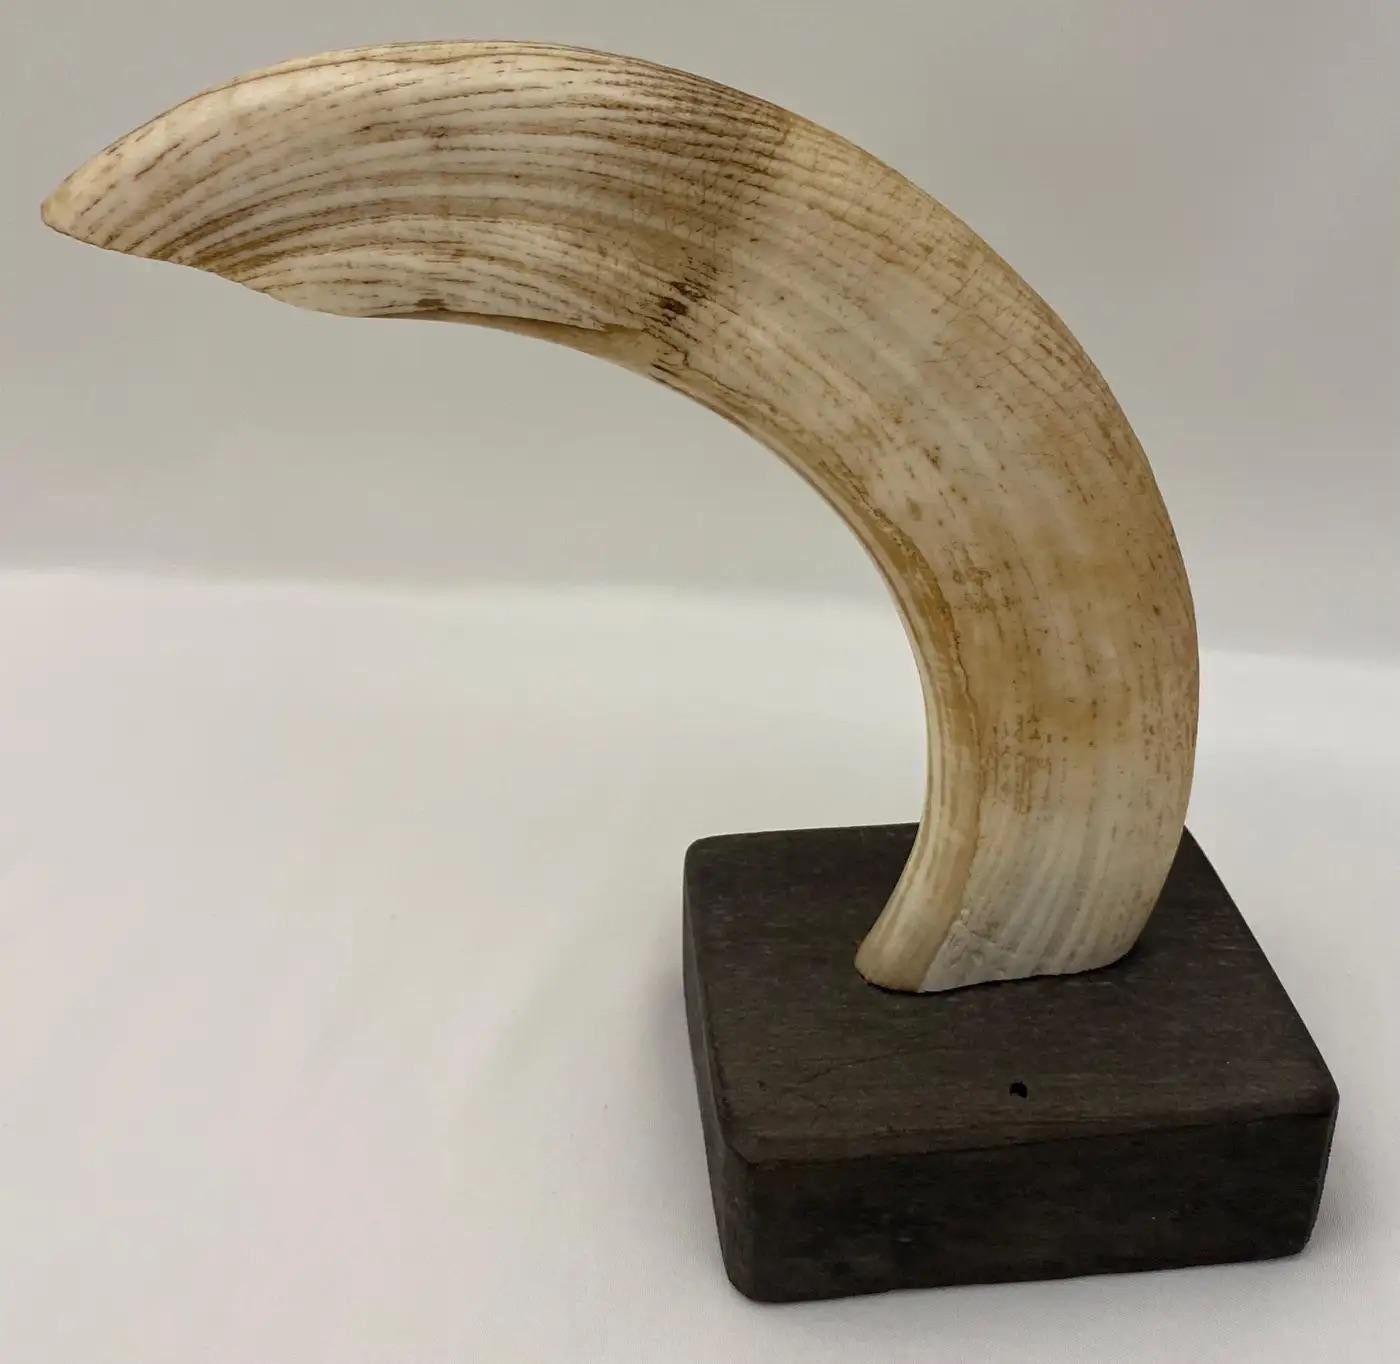 Rare pair of natural hippo teeth bookends. 

Perfect to display your favorite books on a nightstand, mantel, dresser or shelf. Certainly a topic of conversation. 

The antique set of books shown in the photographs are not included in the